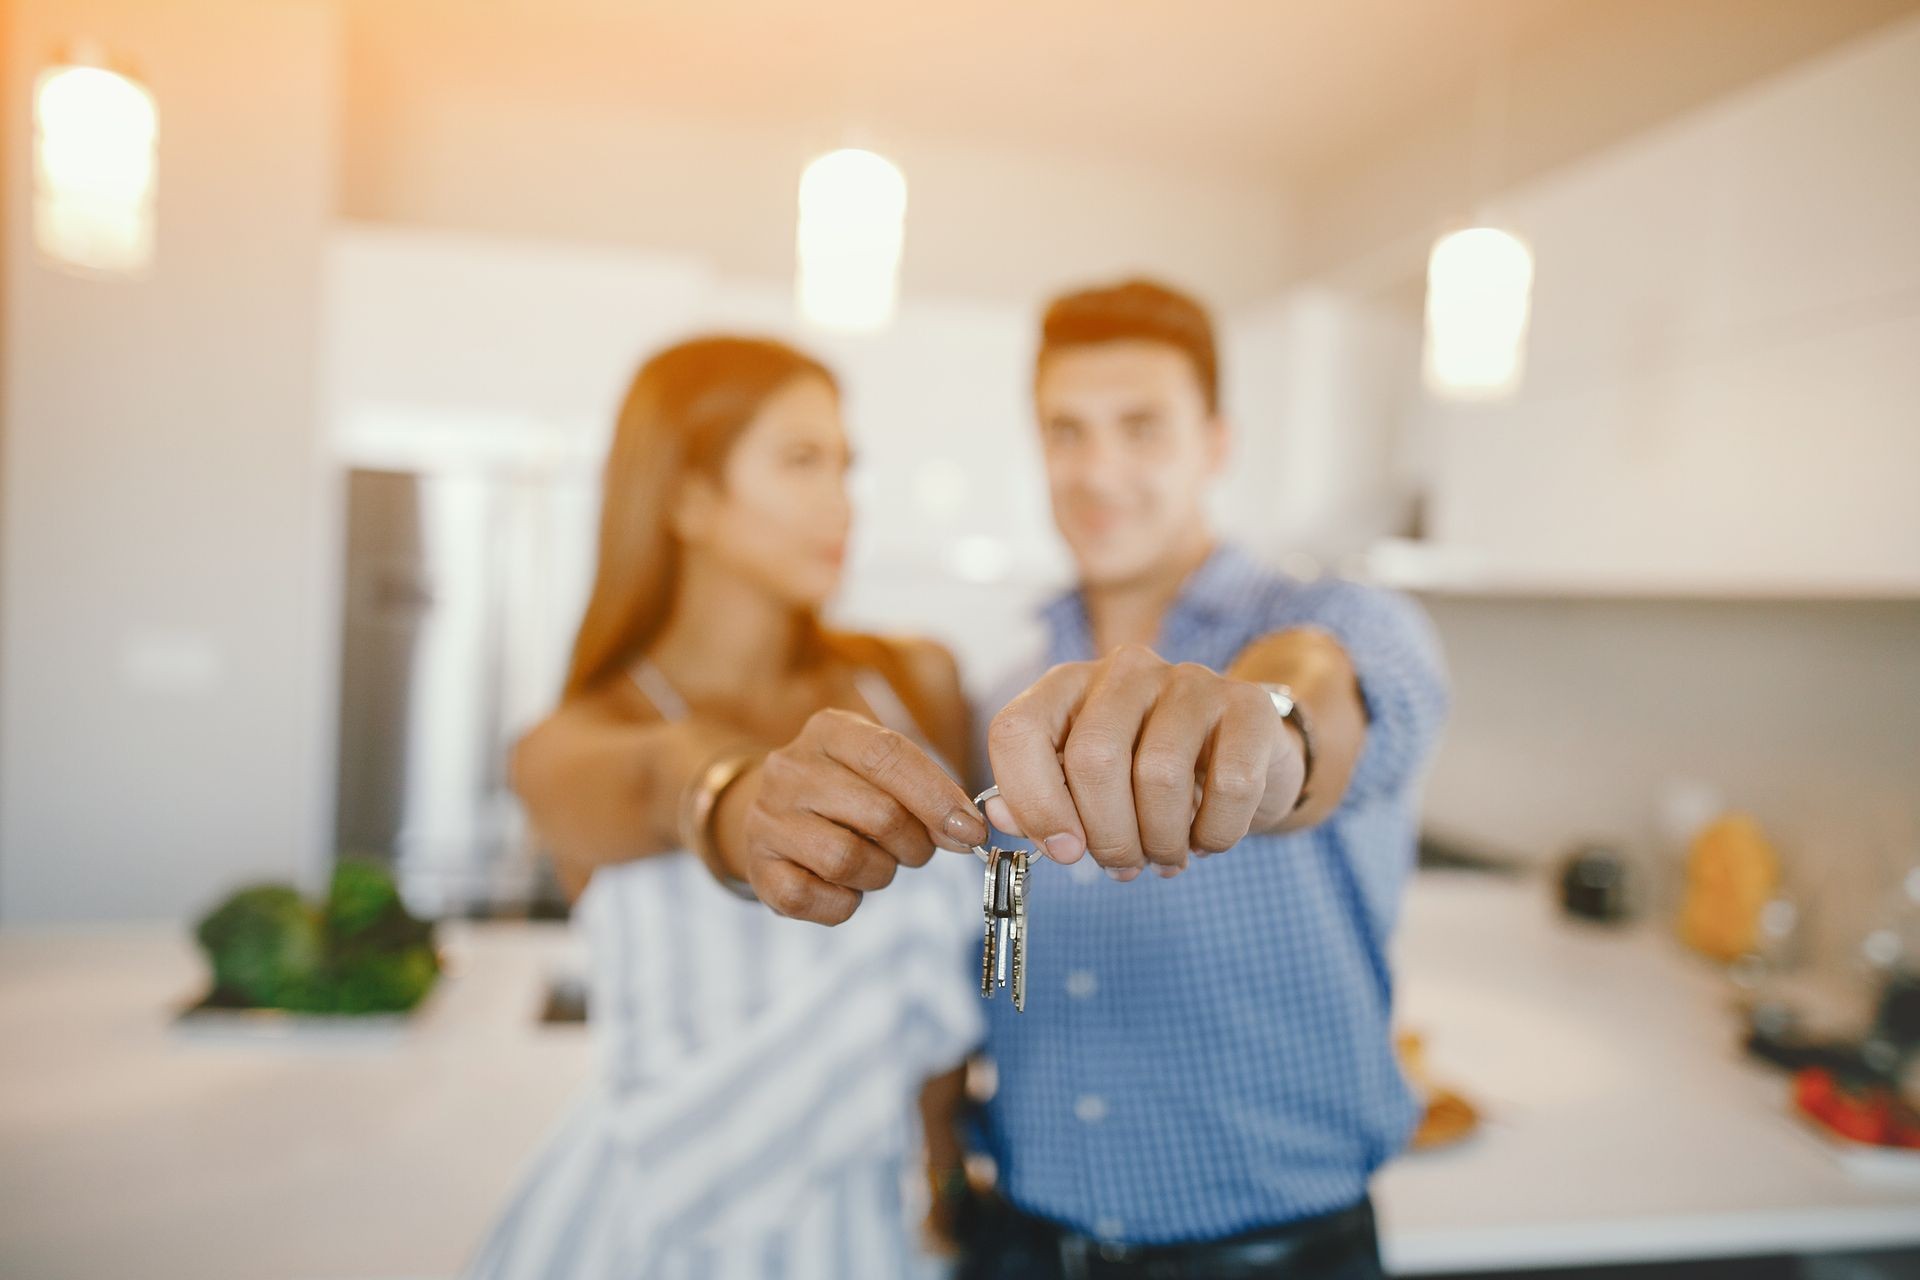 Copule with keys. The spouses hold the keys to the apartment in their hands